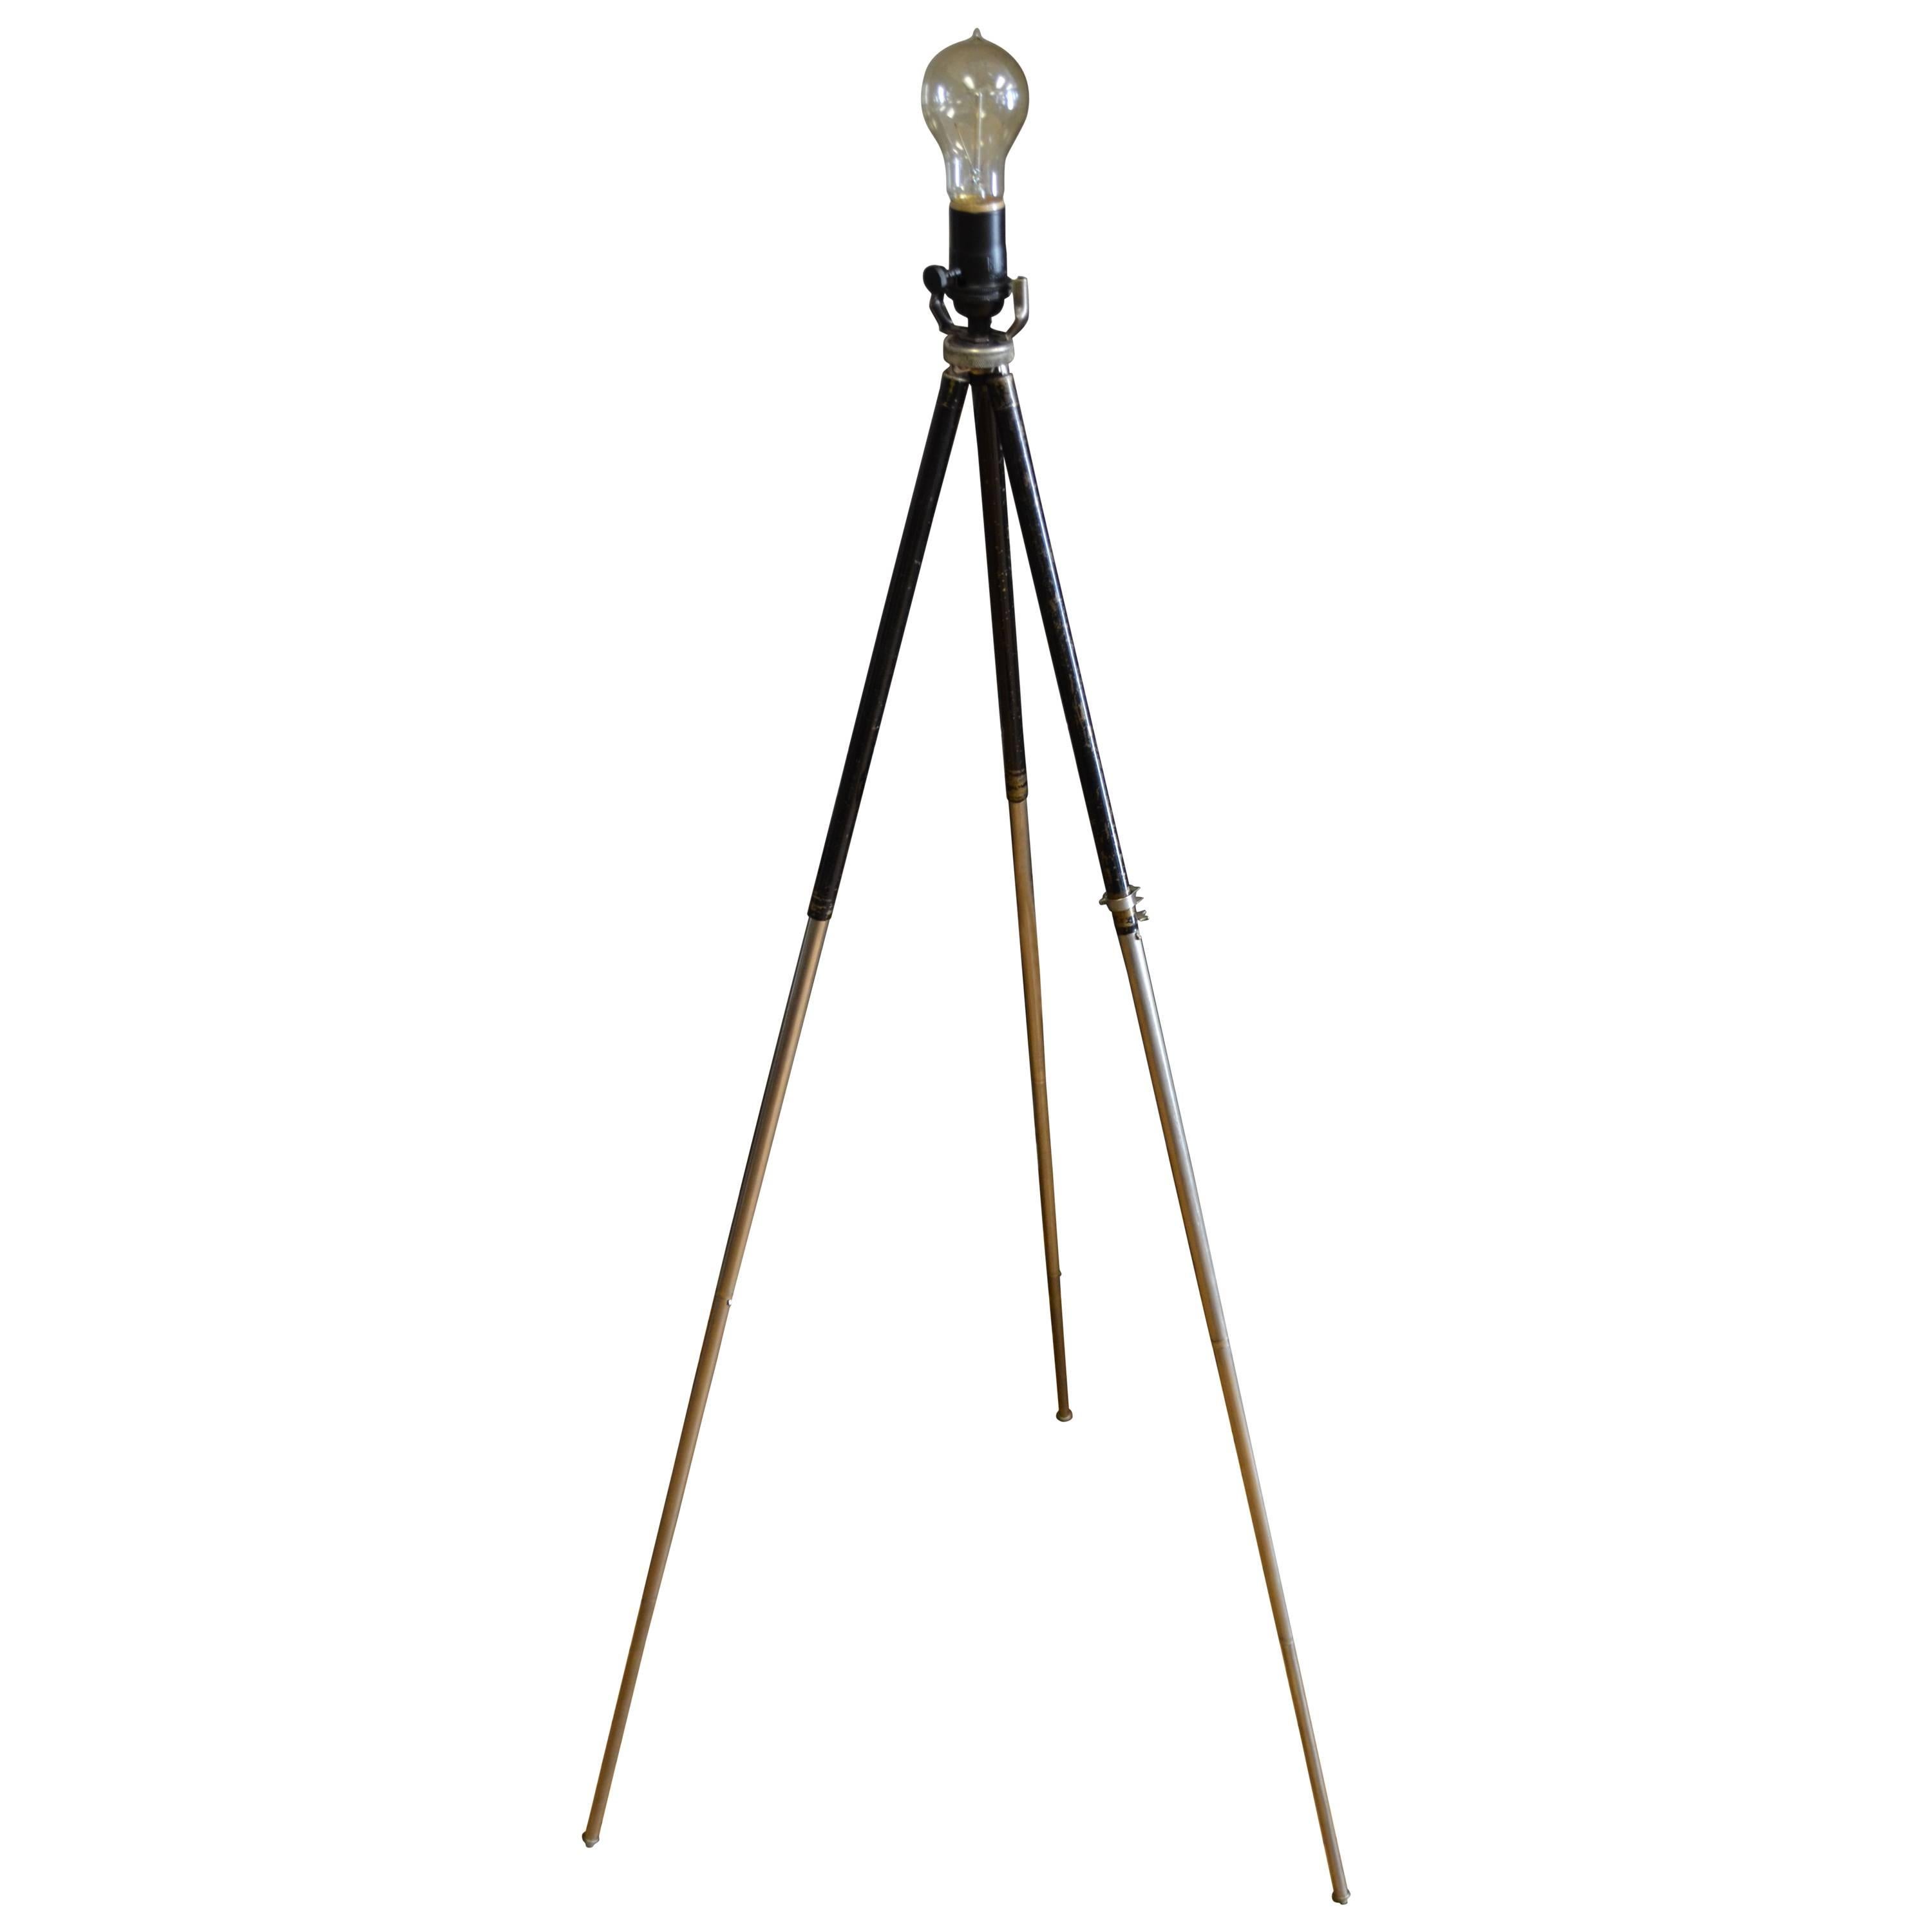 Lamp for Table or Floor Made from Photographer's Tripod